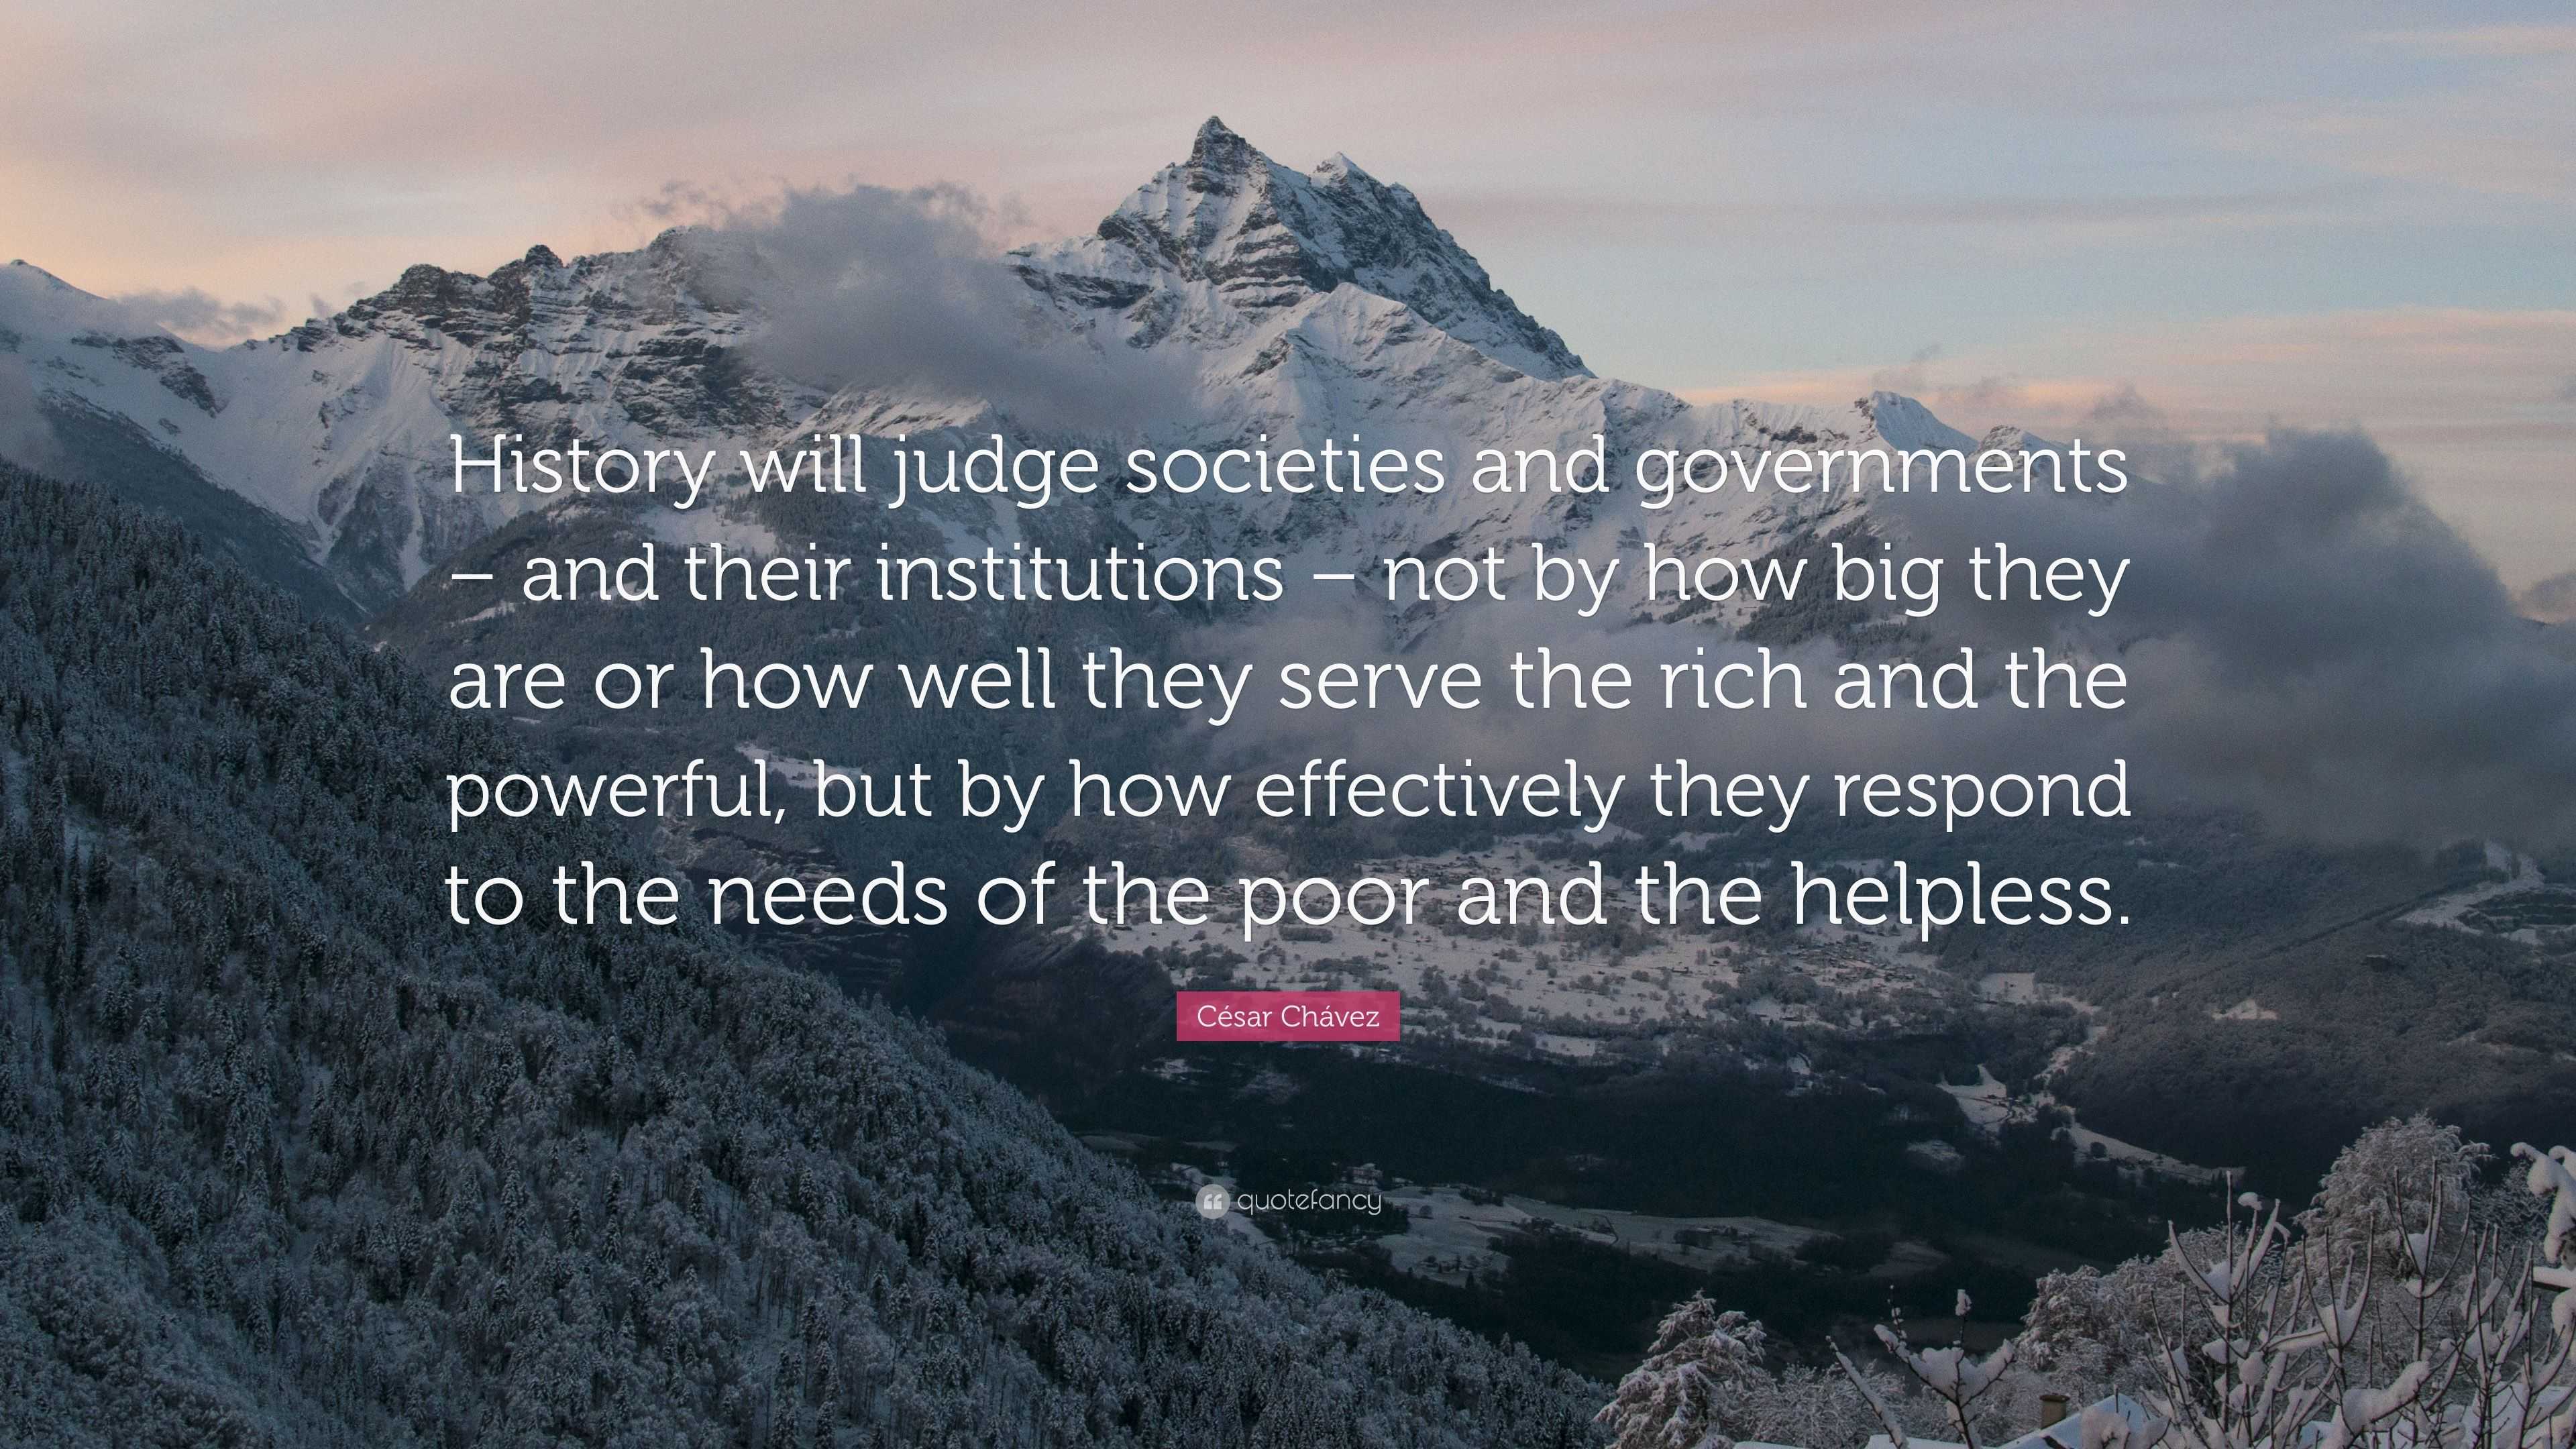 César Chávez Quote: “History will judge societies and governments – and ...